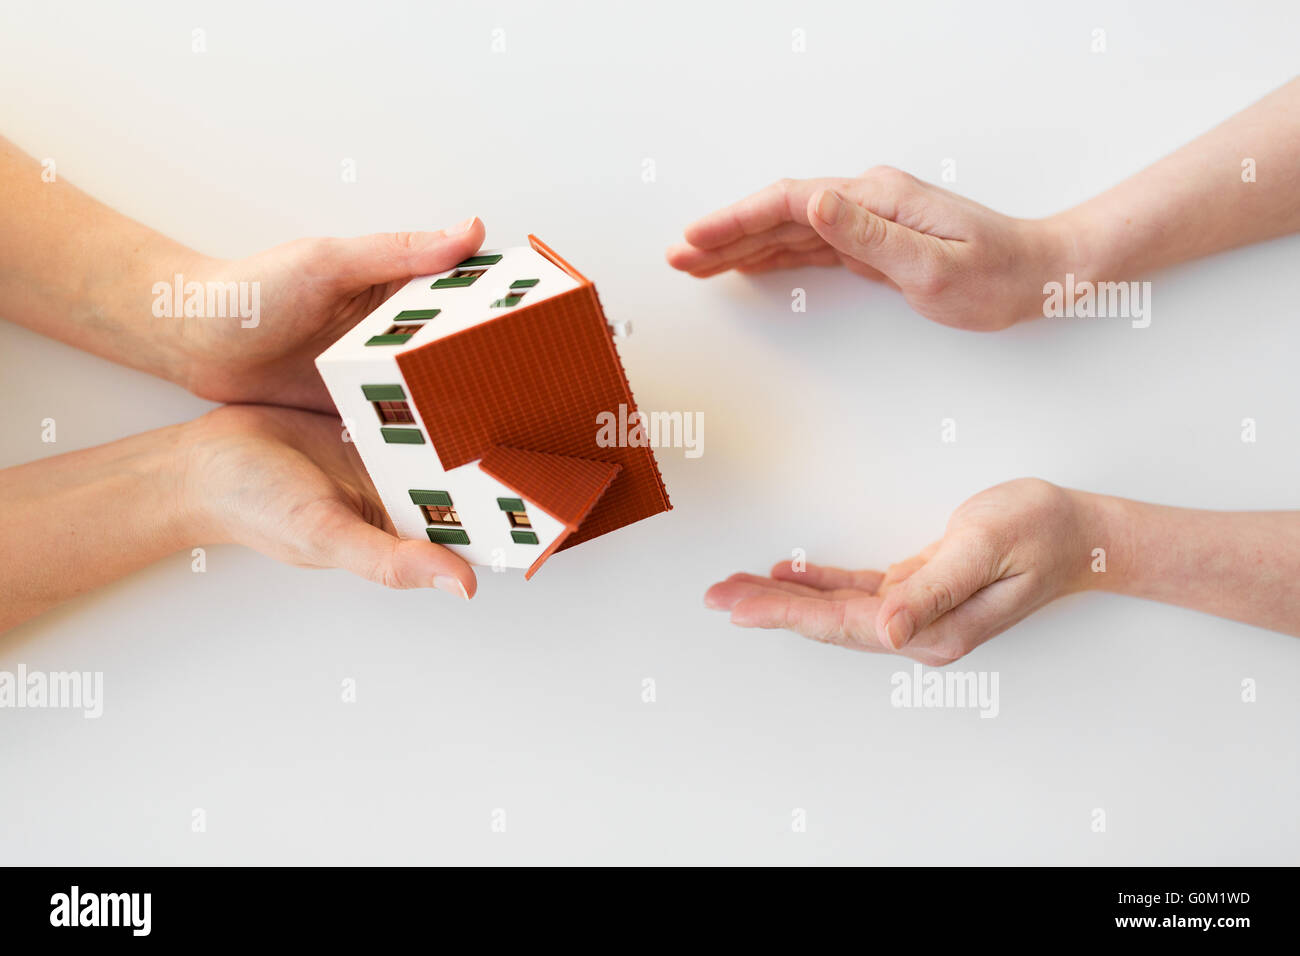 close up of hands giving house or home model Stock Photo